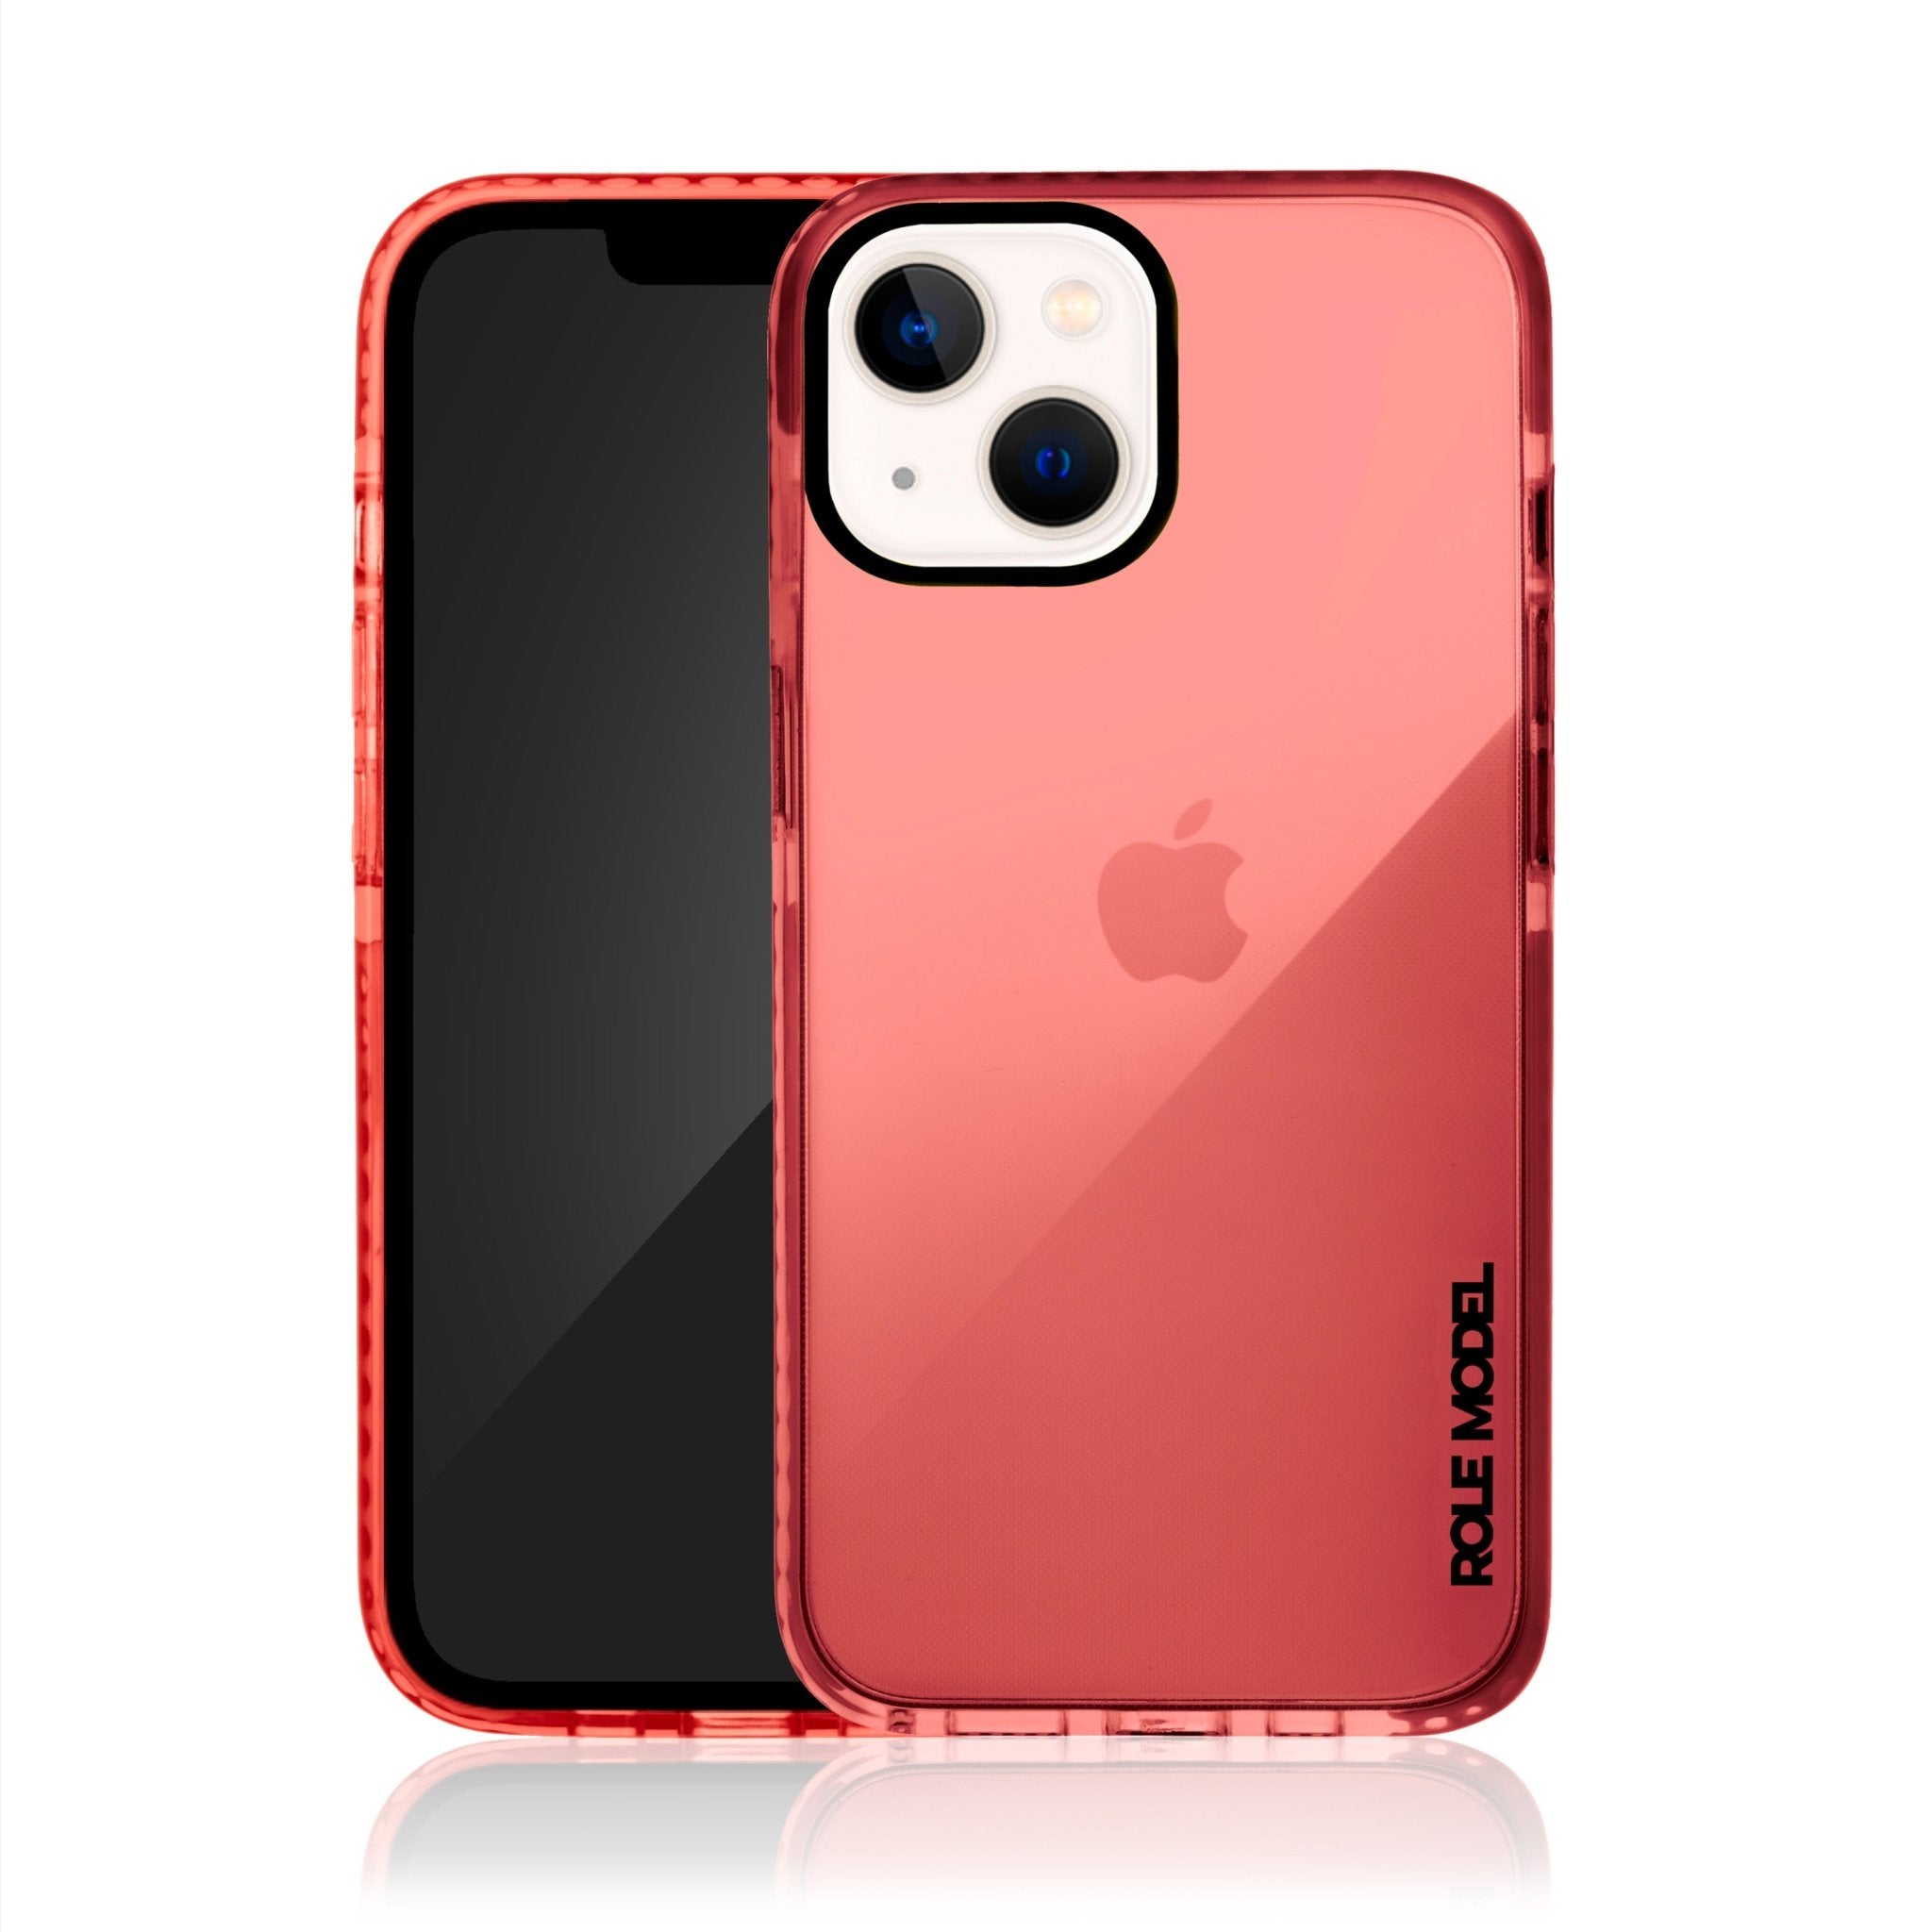 Cybercase™ Bloodred Edition - ROLE MODEL